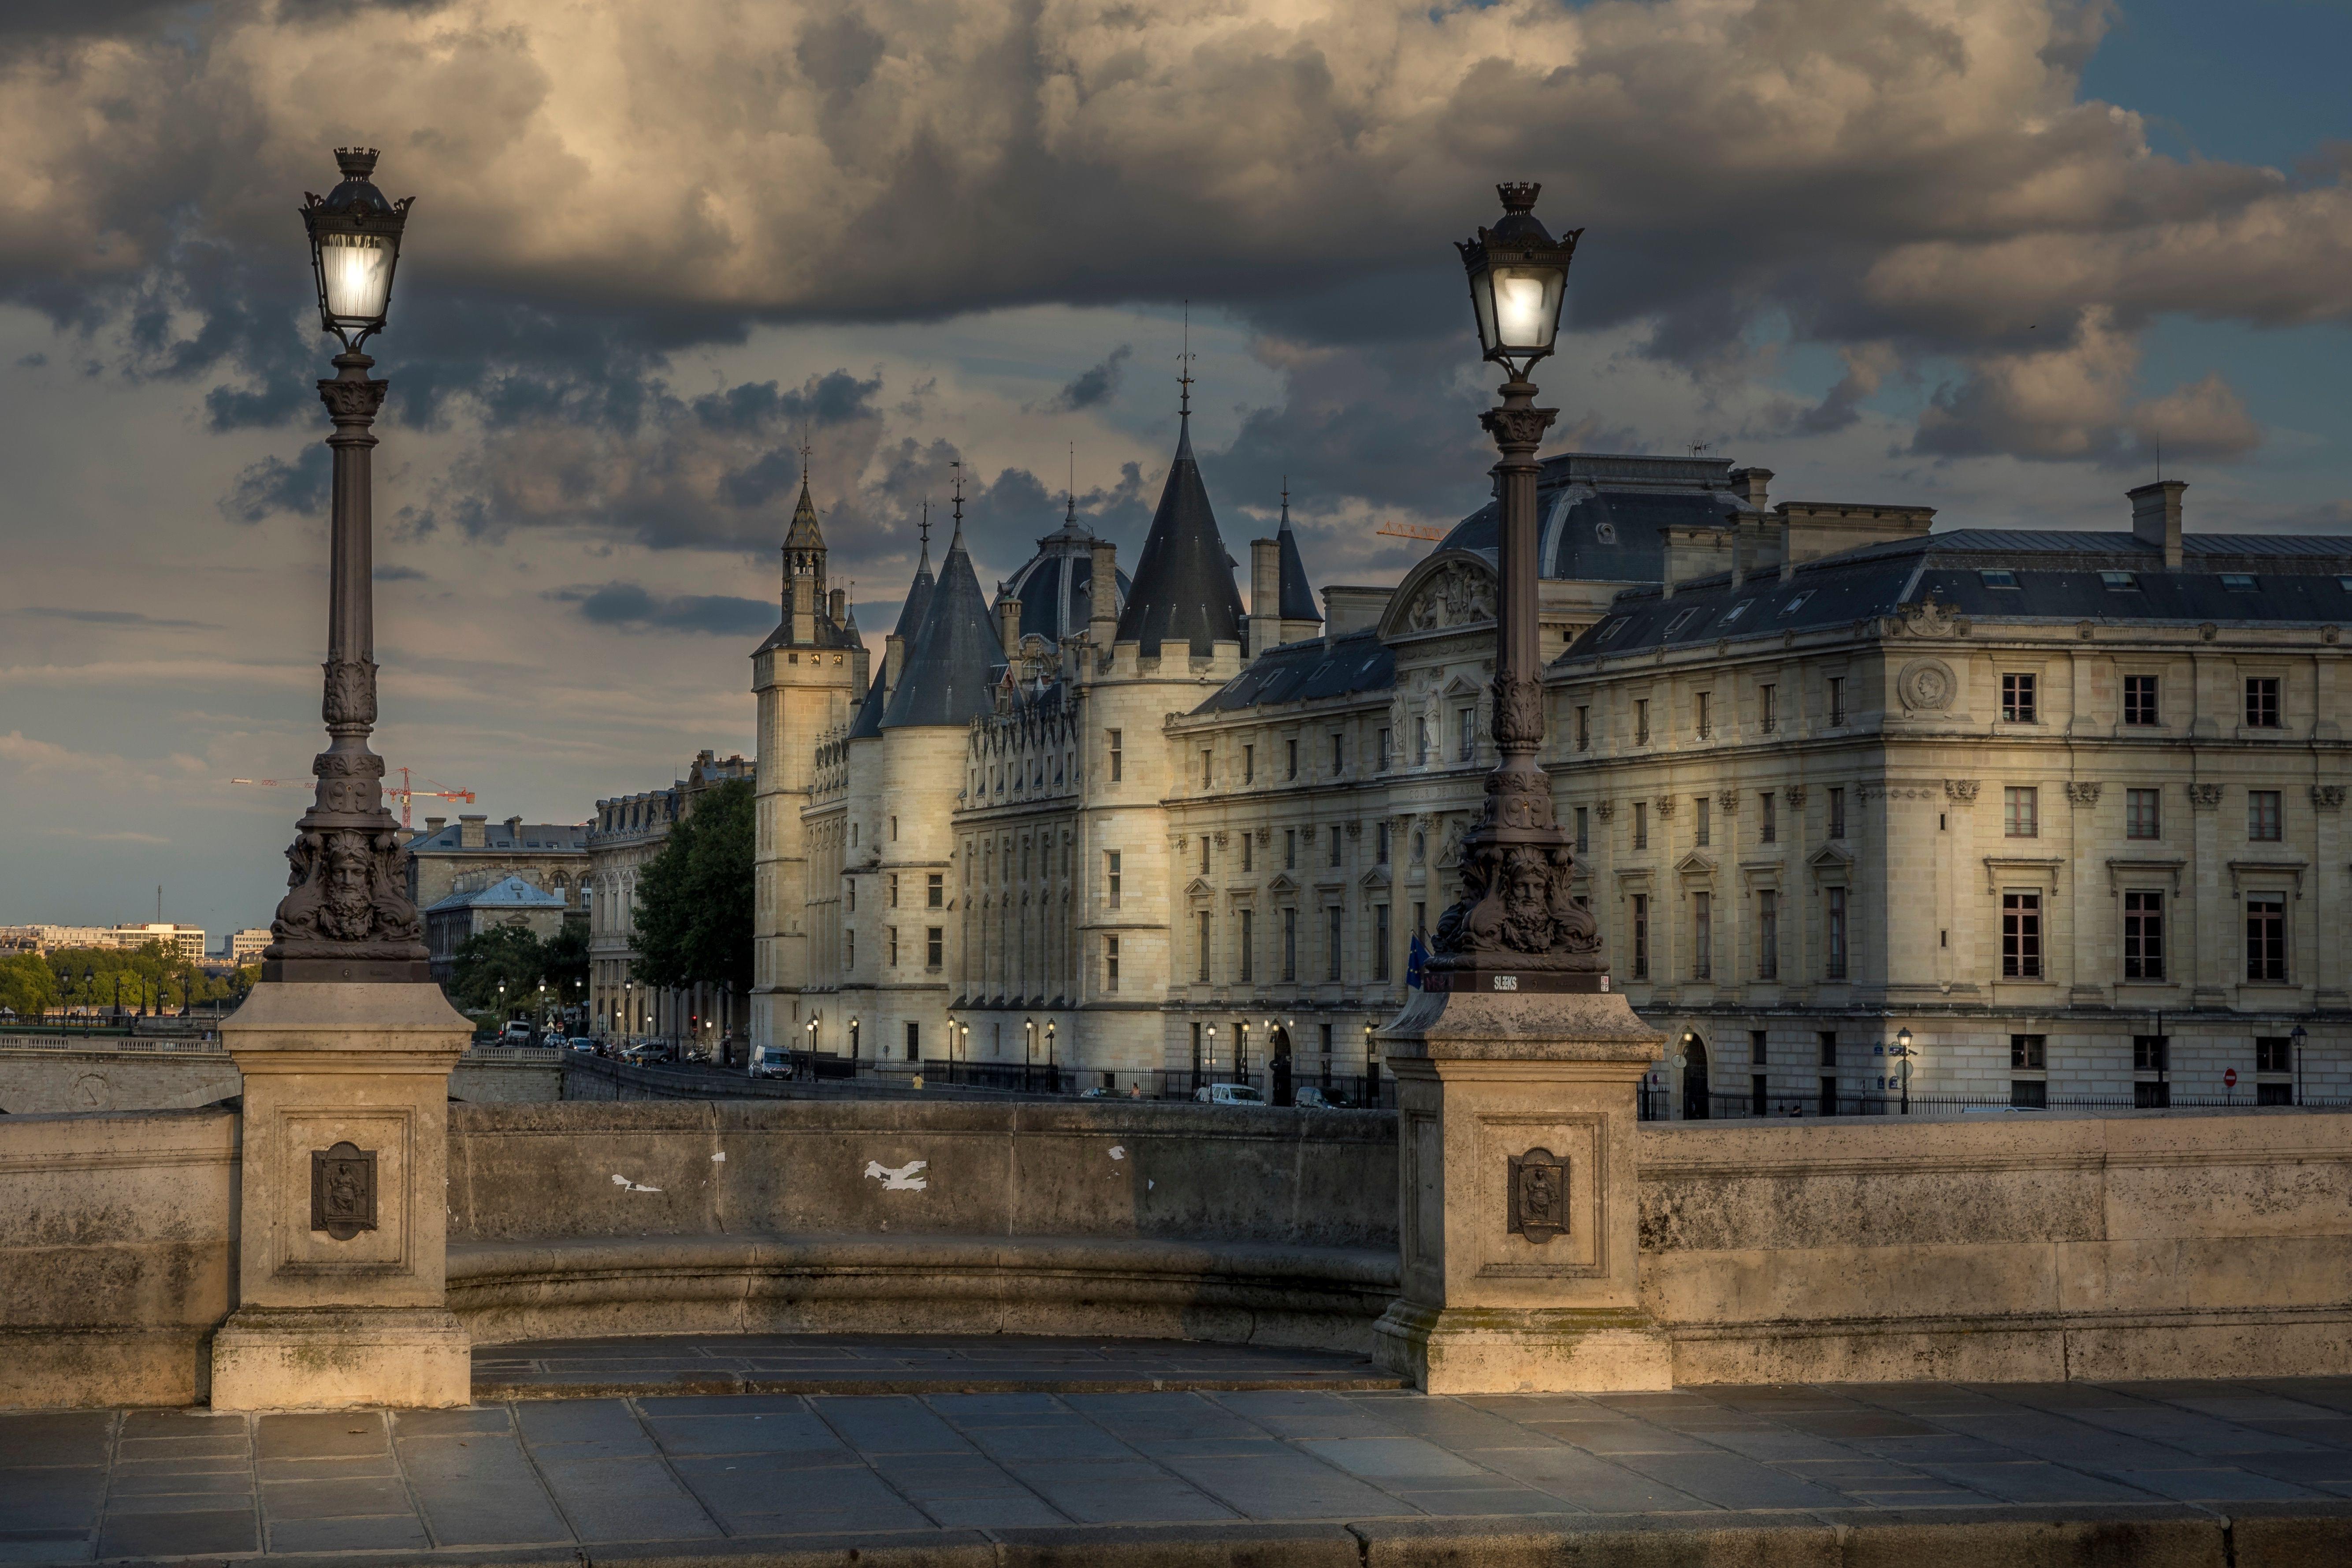 View of Conciergerie palace at night in Paris